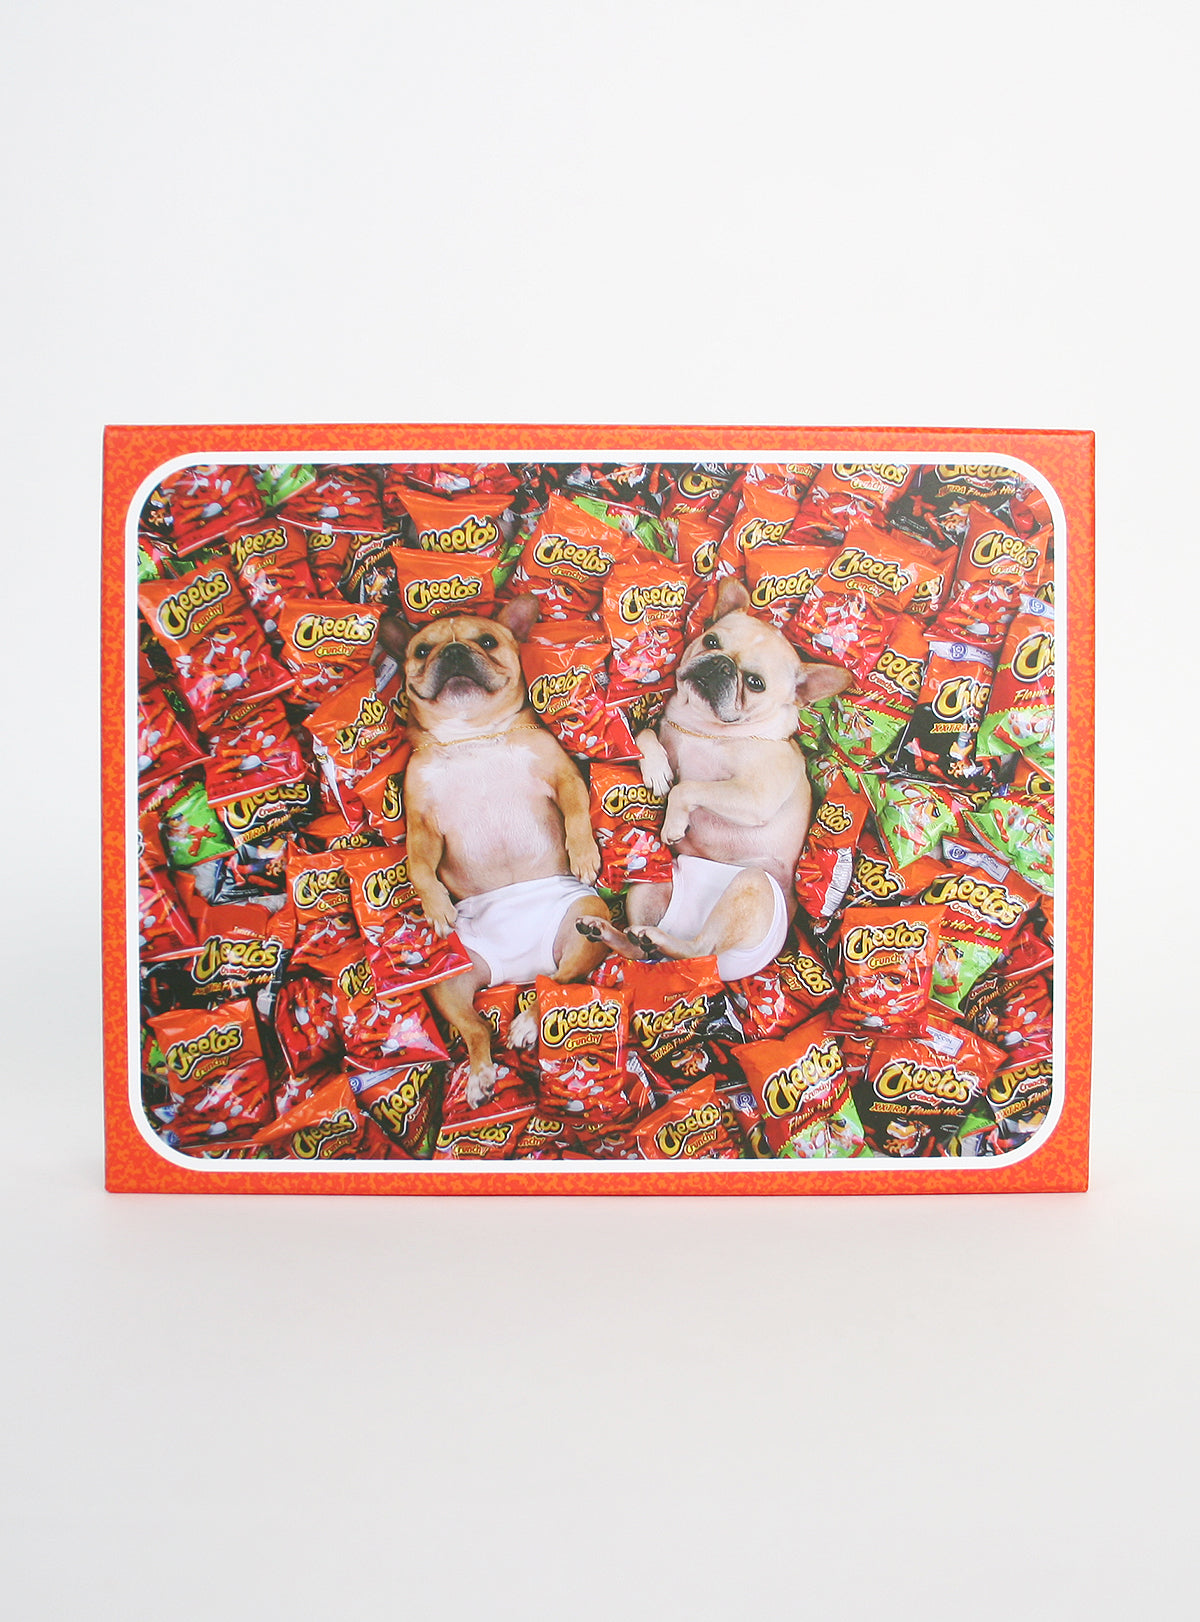 Snack Attack Jigsaw Puzzle